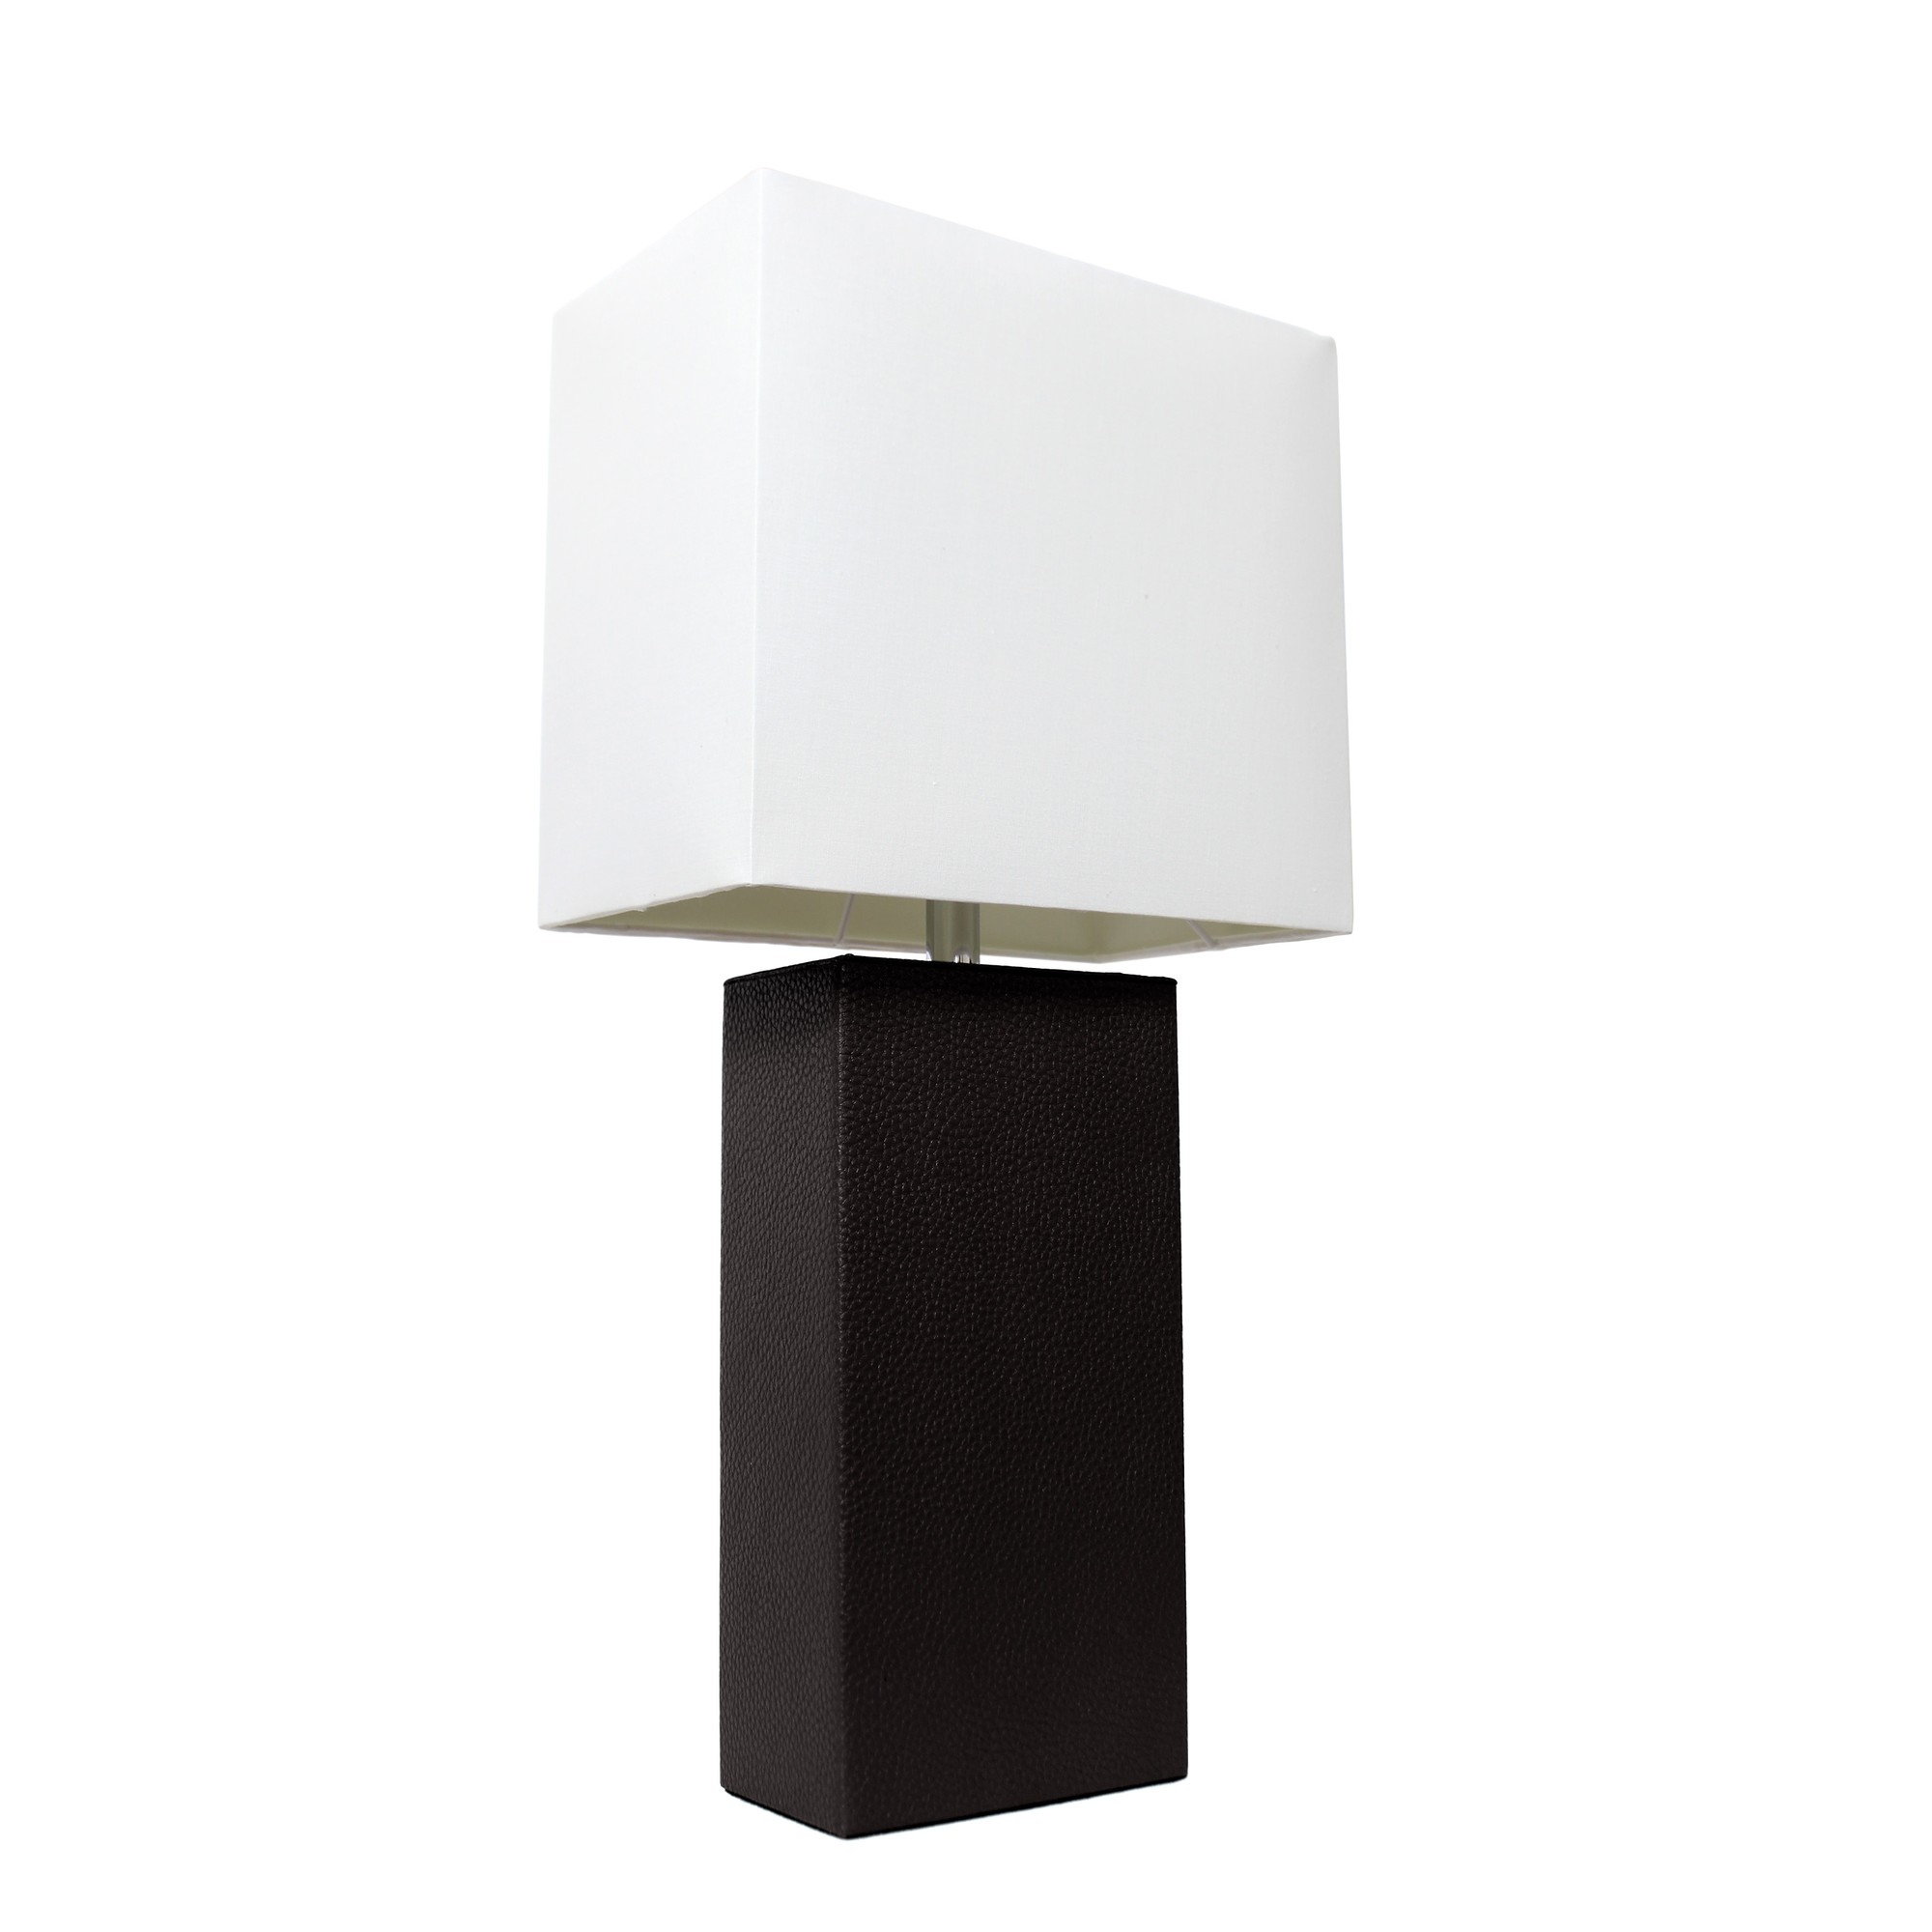 21in Leather Base Table Lamp with Wht Shade Black